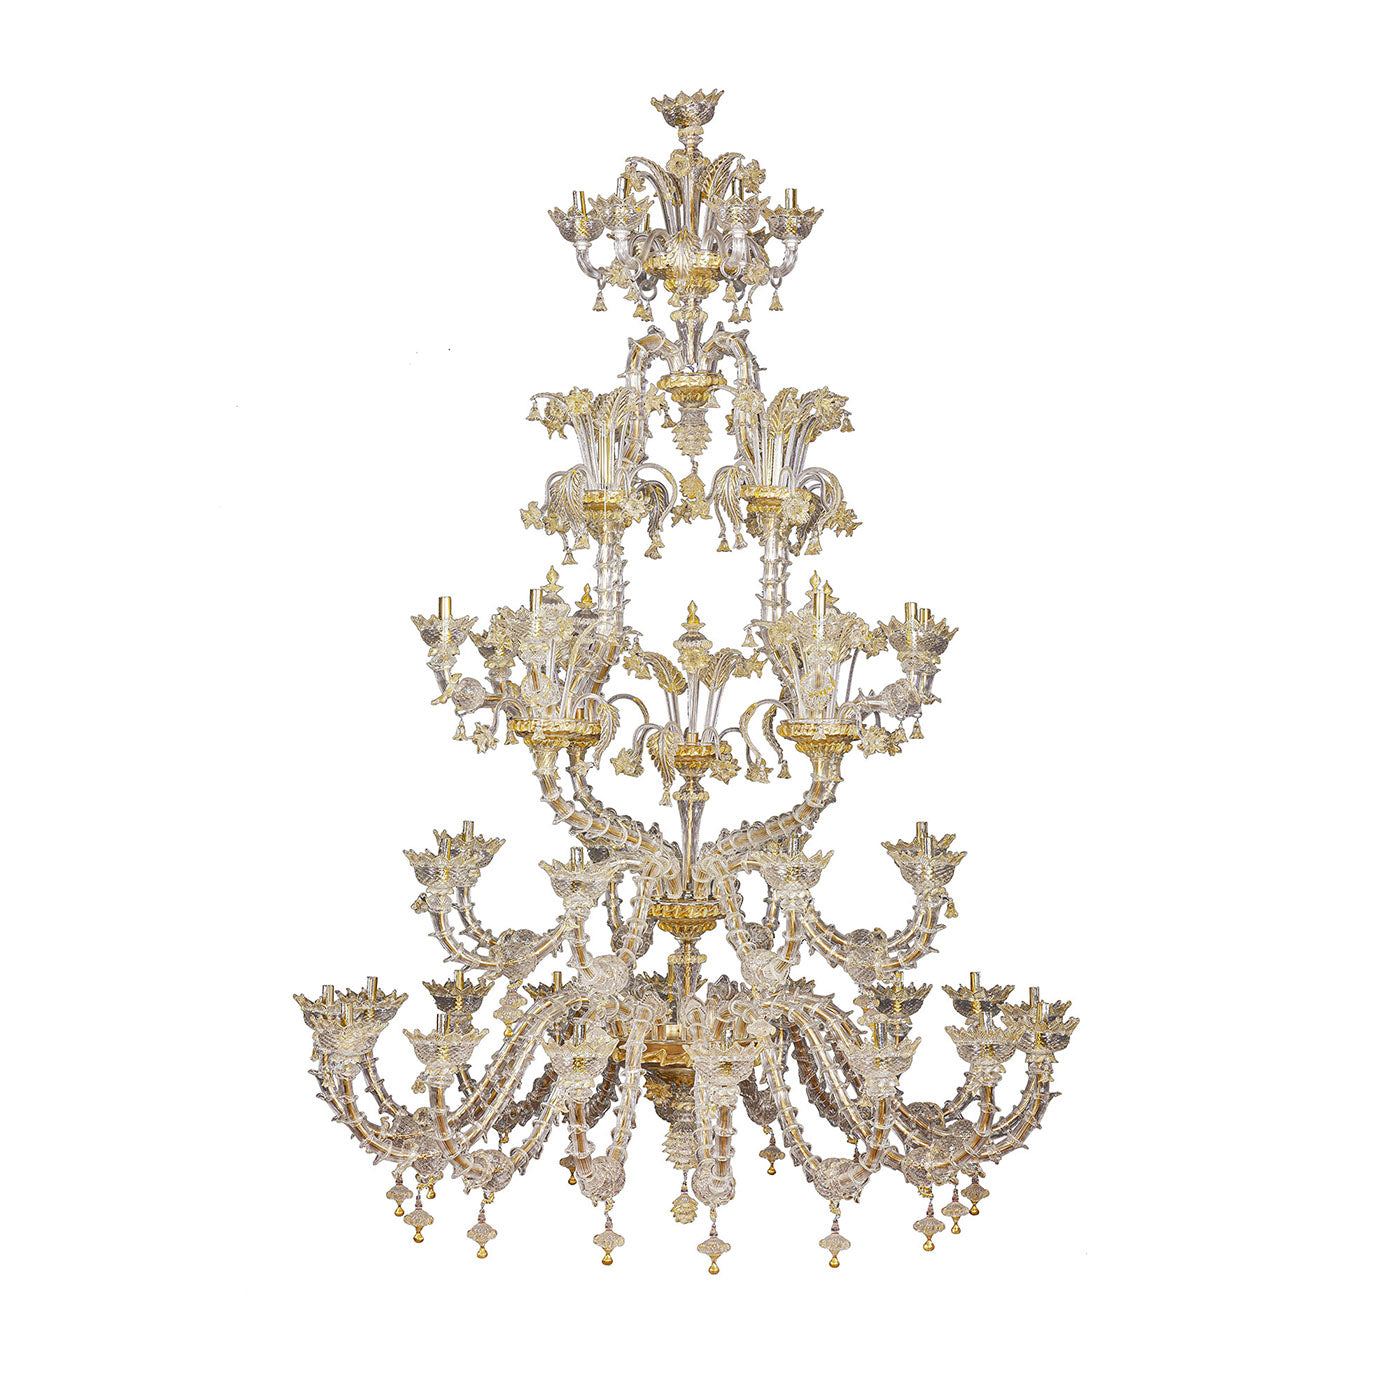 Rezzonico-style Gold and Crystal Chandelier #2 - Main view